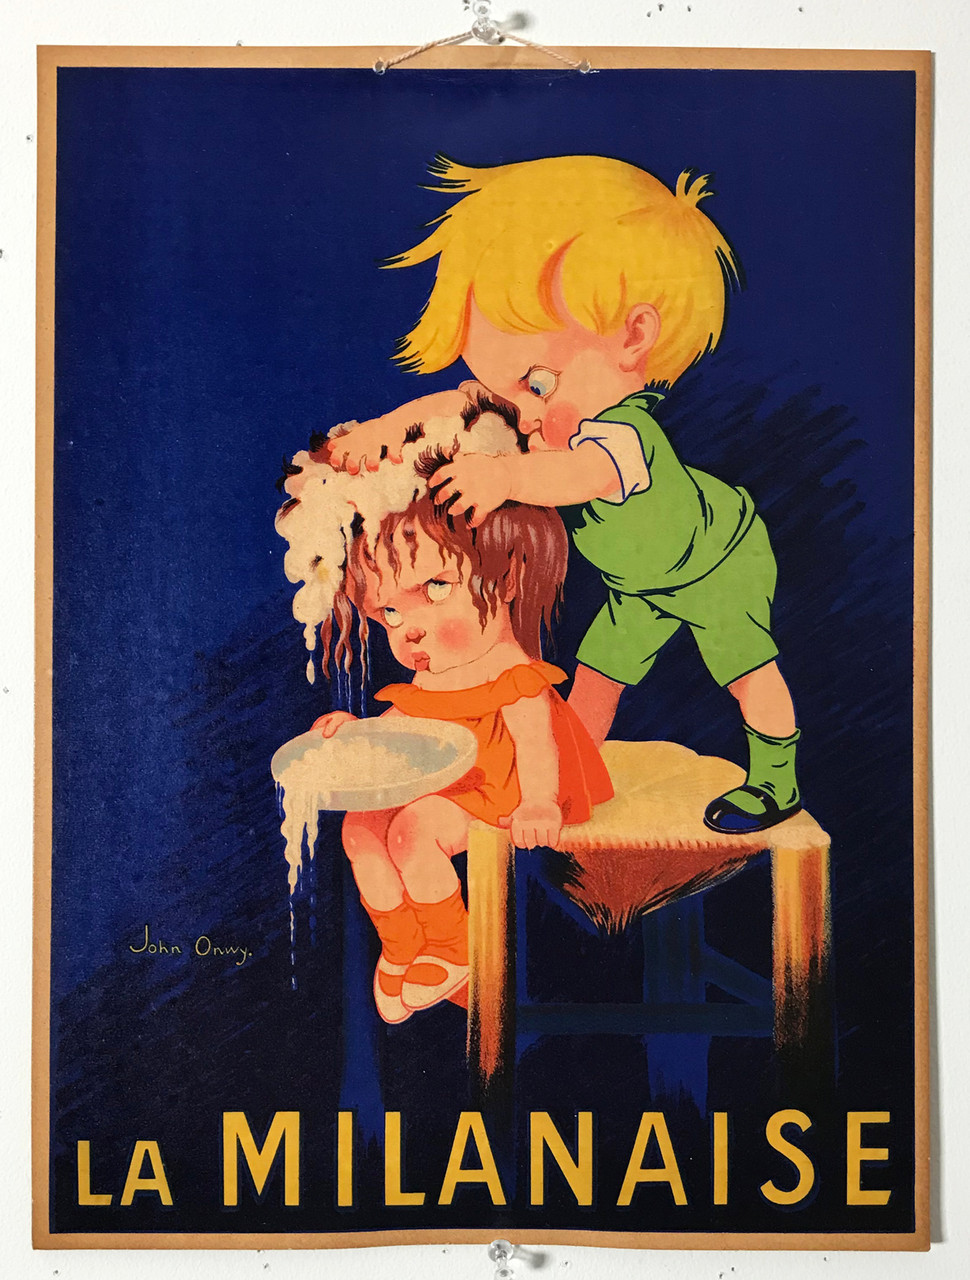 La Milanaise by John Onwy Original 1930 Vintage Shampooo Advertisement In Store Display Lithograph Poster on Cardboard. Shows  a boy dressed in green standing on a chair washing a girls hair who wears orange.